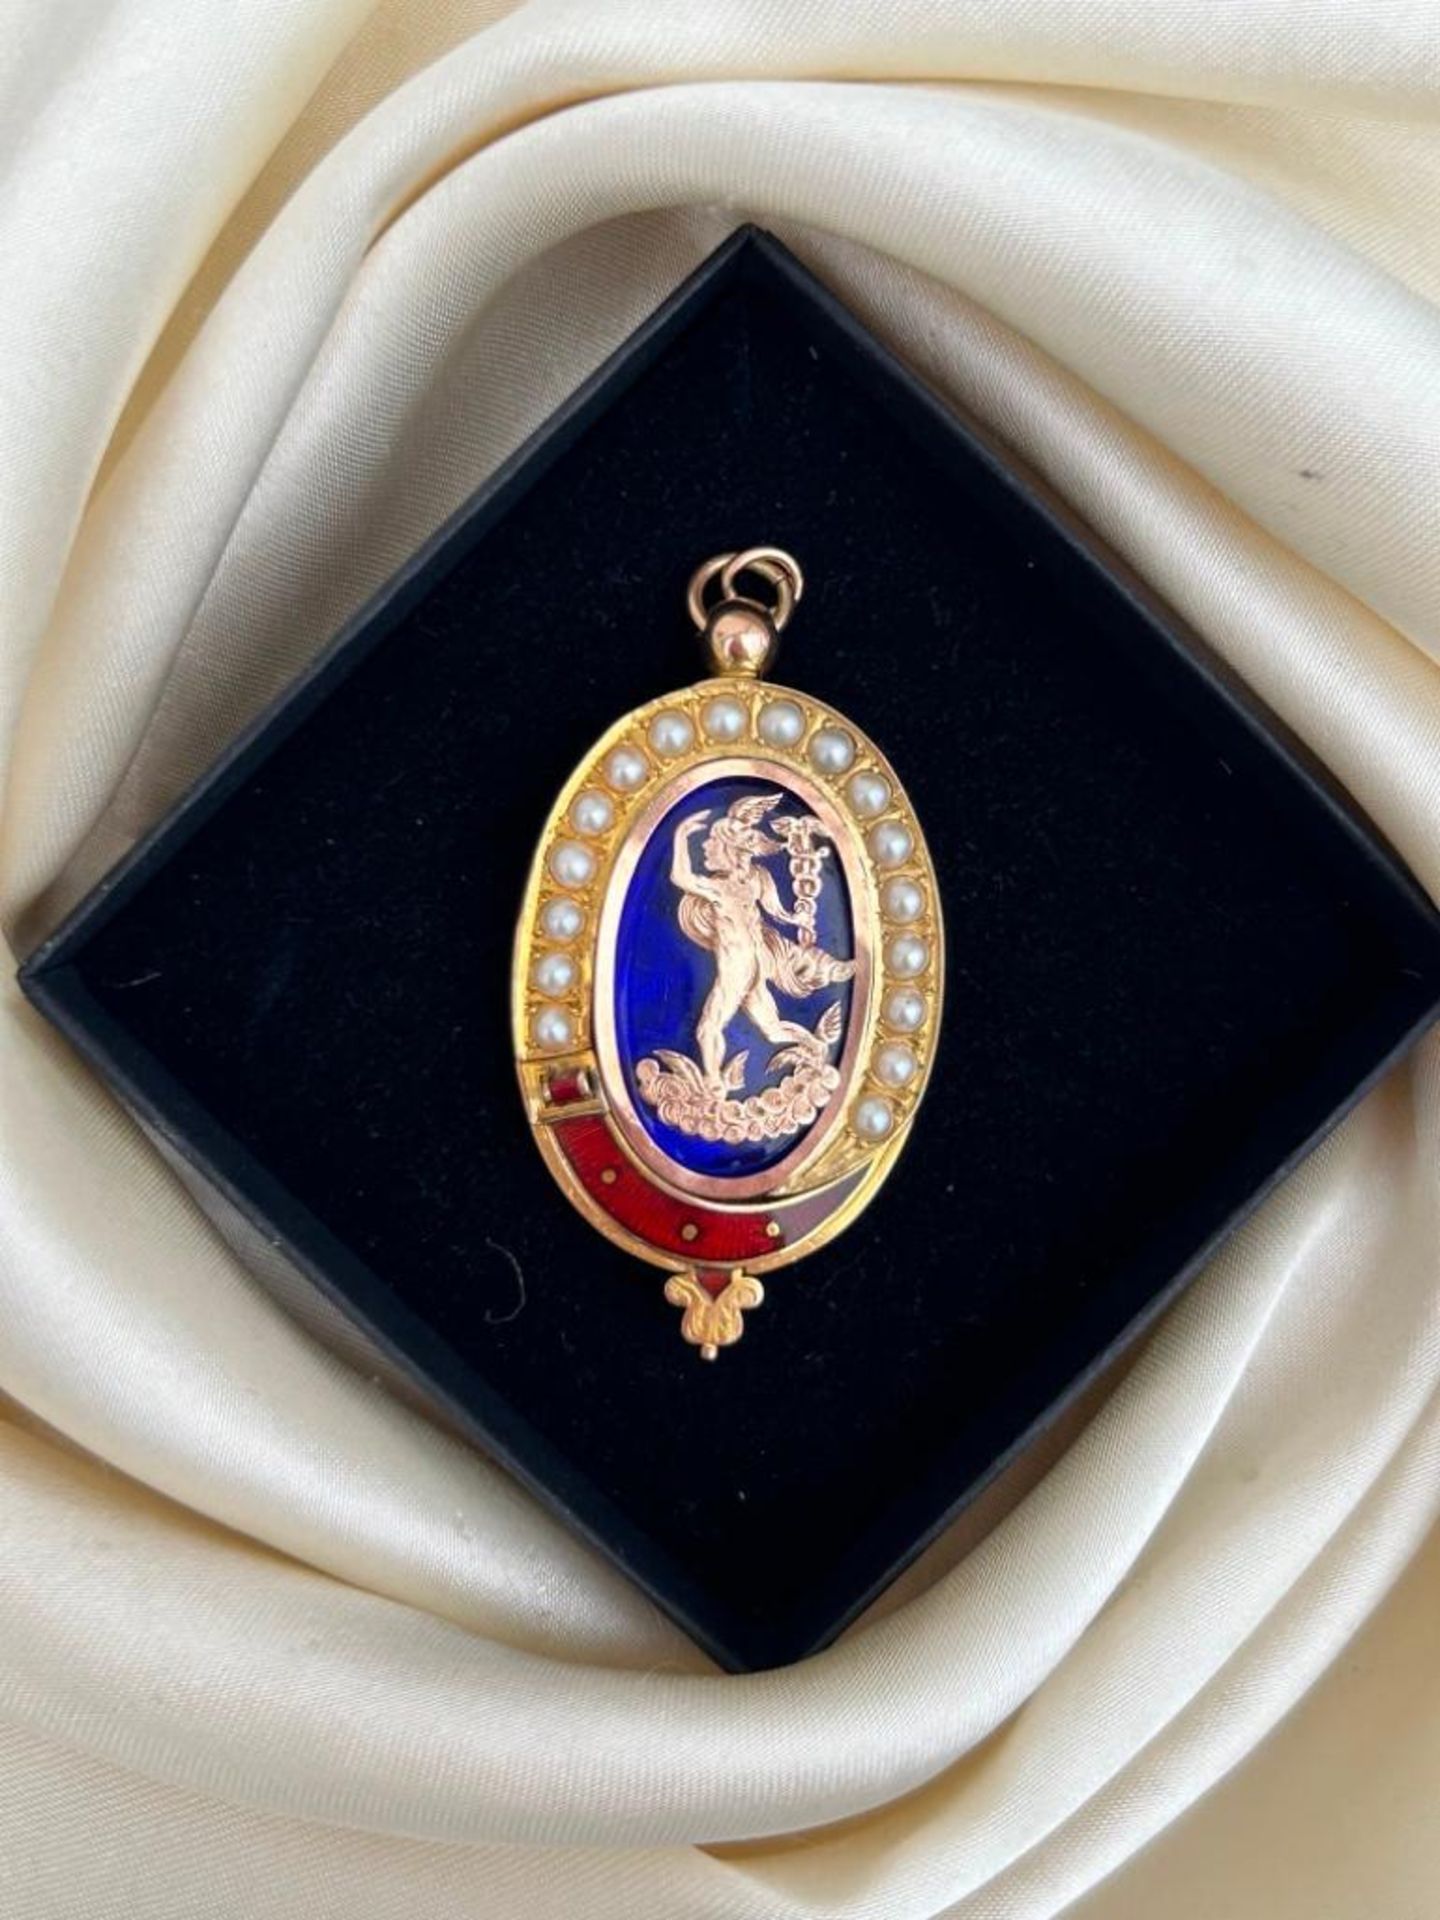 Rare Antique Gold Pearl Bristol Blue Glass and Enamel Large Pendant - Image 4 of 6